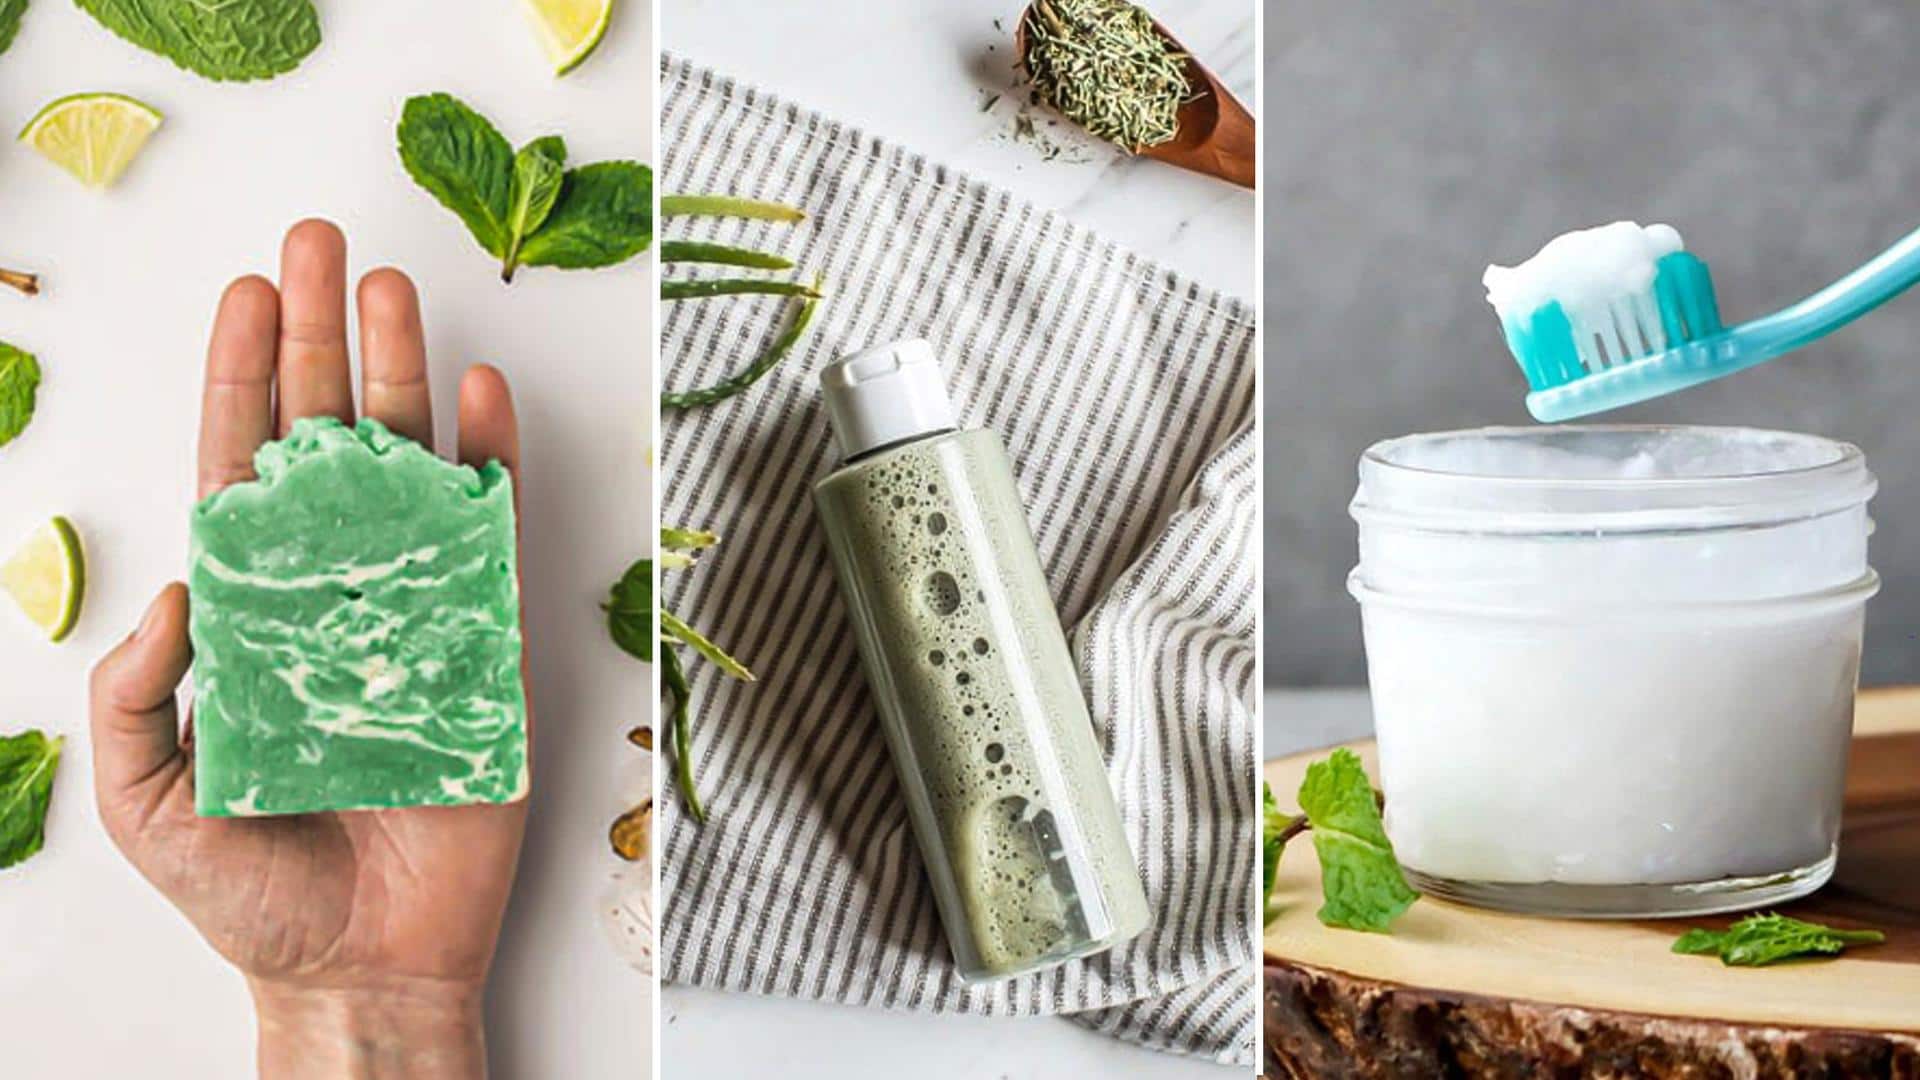 5 Ayurvedic products that you can easily make at home